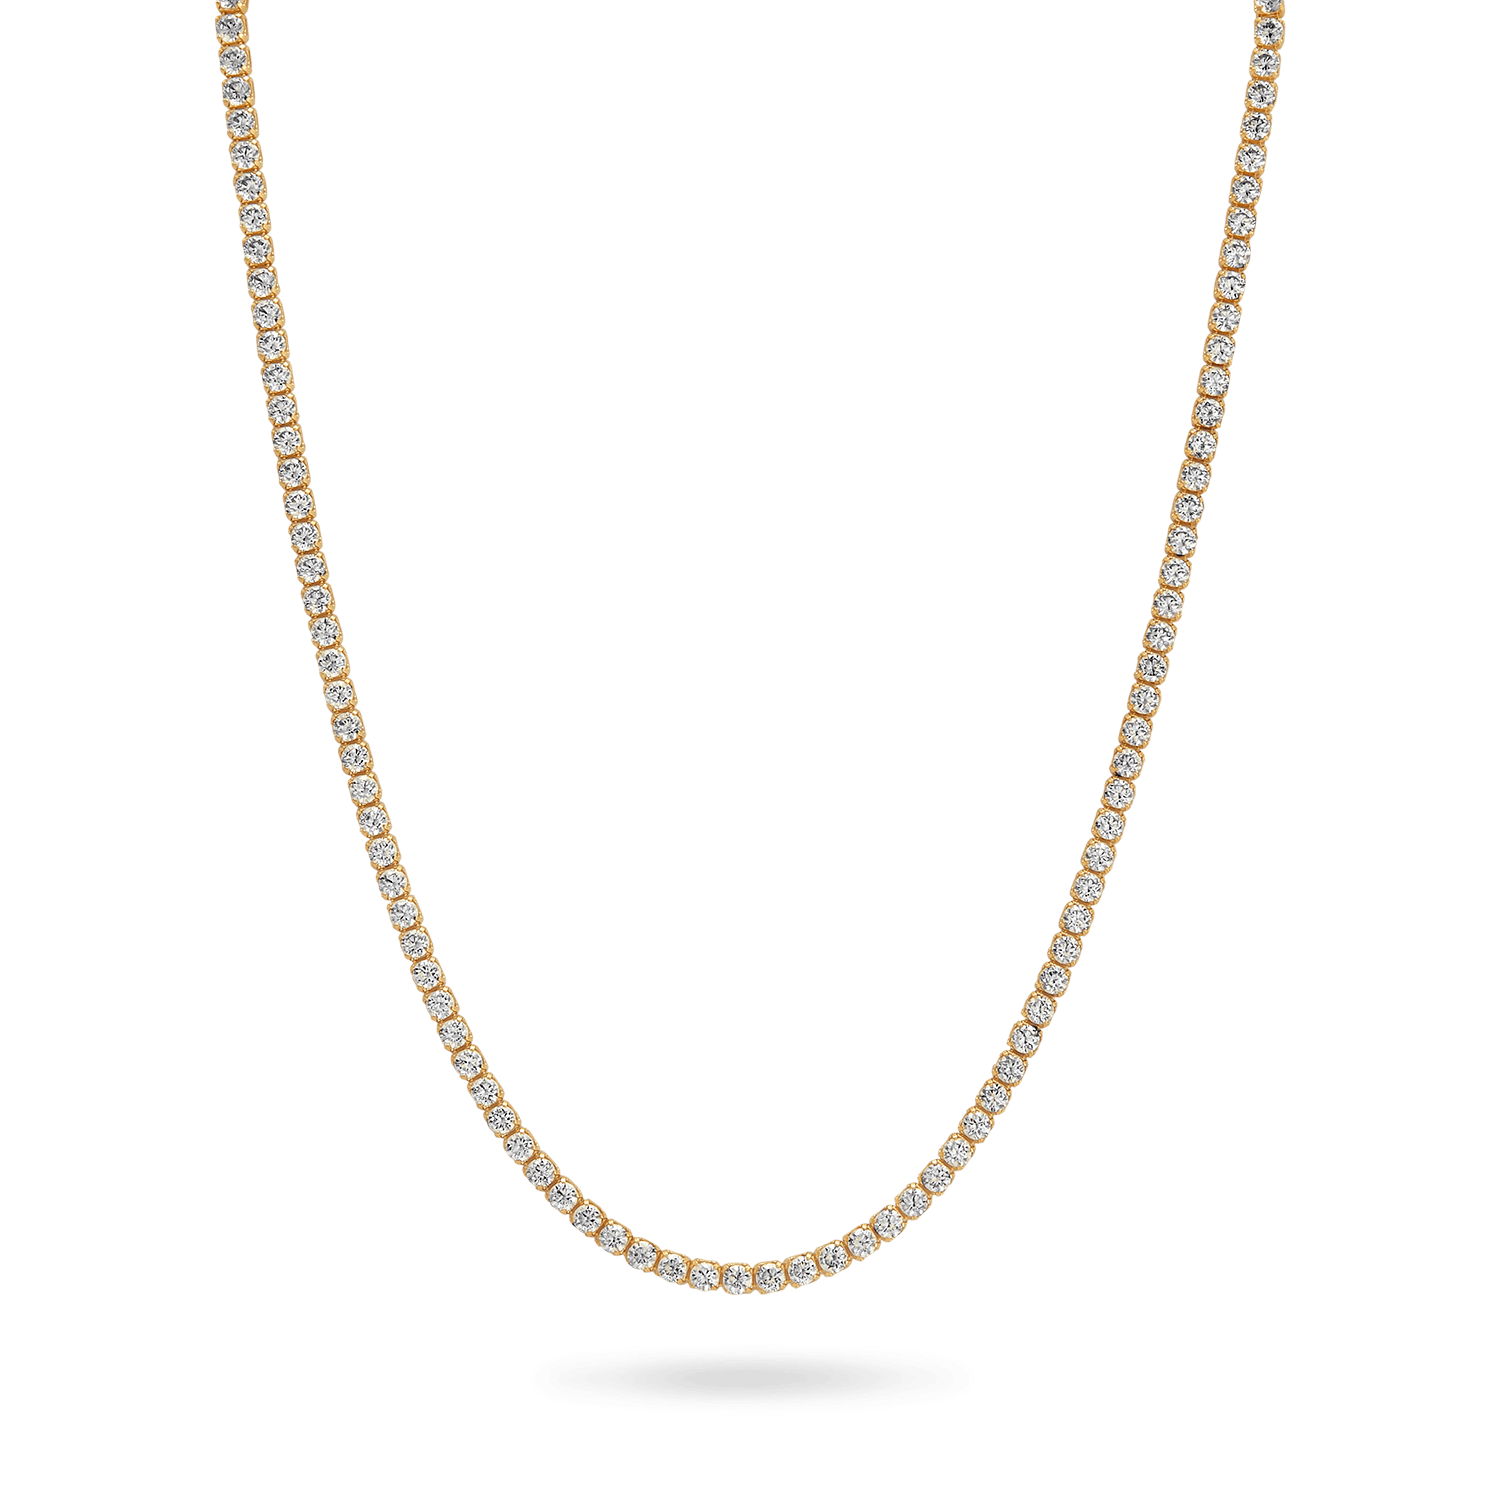 10K Gold Moissanite Tennis Necklace 2.75mm Necklaces IceLink-CAL   